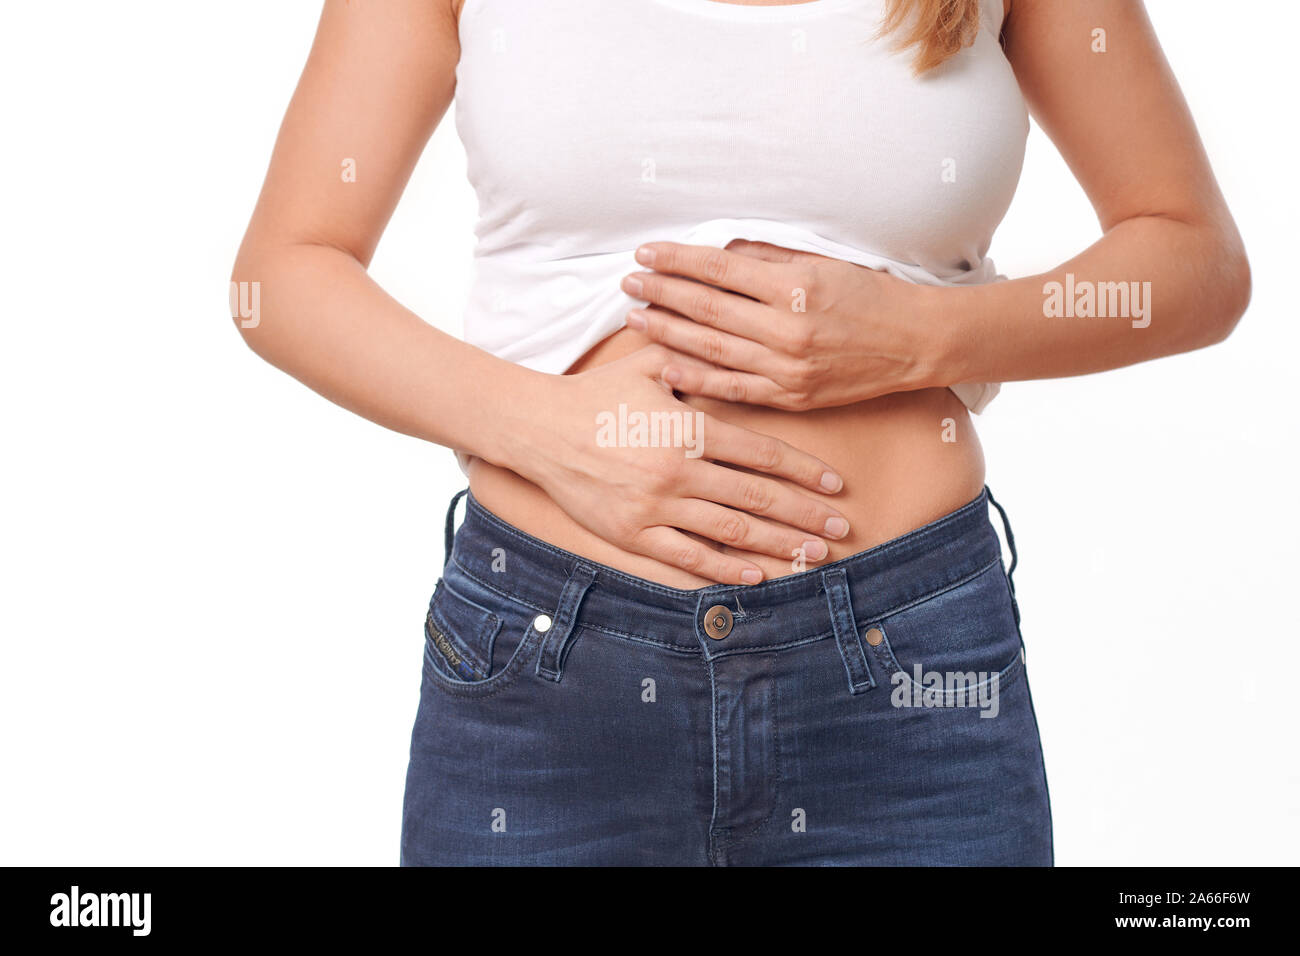 Woman with her monthly menstrual pains clutching her stomach with her hands as she becomes stressed by the ongoing cramps, torso view of her hands and Stock Photo